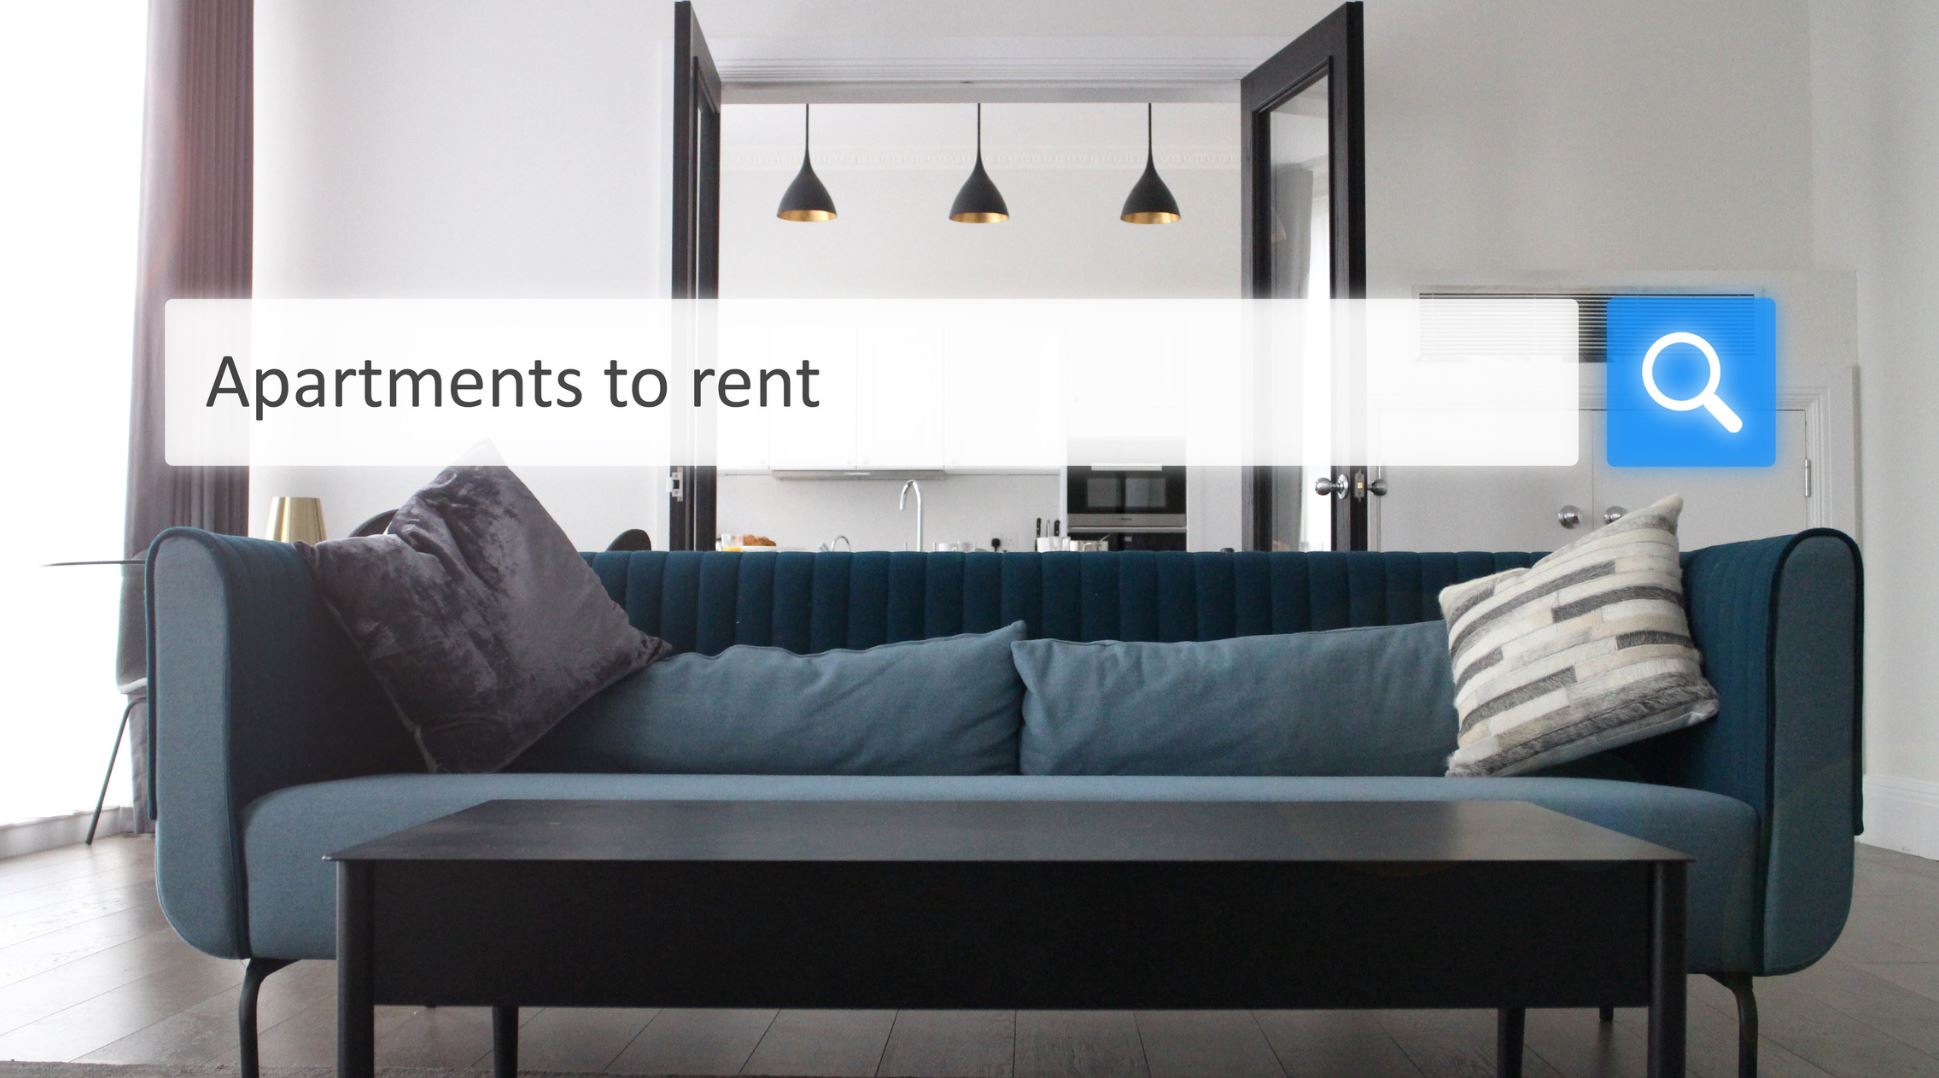 Searching for apartments to rent